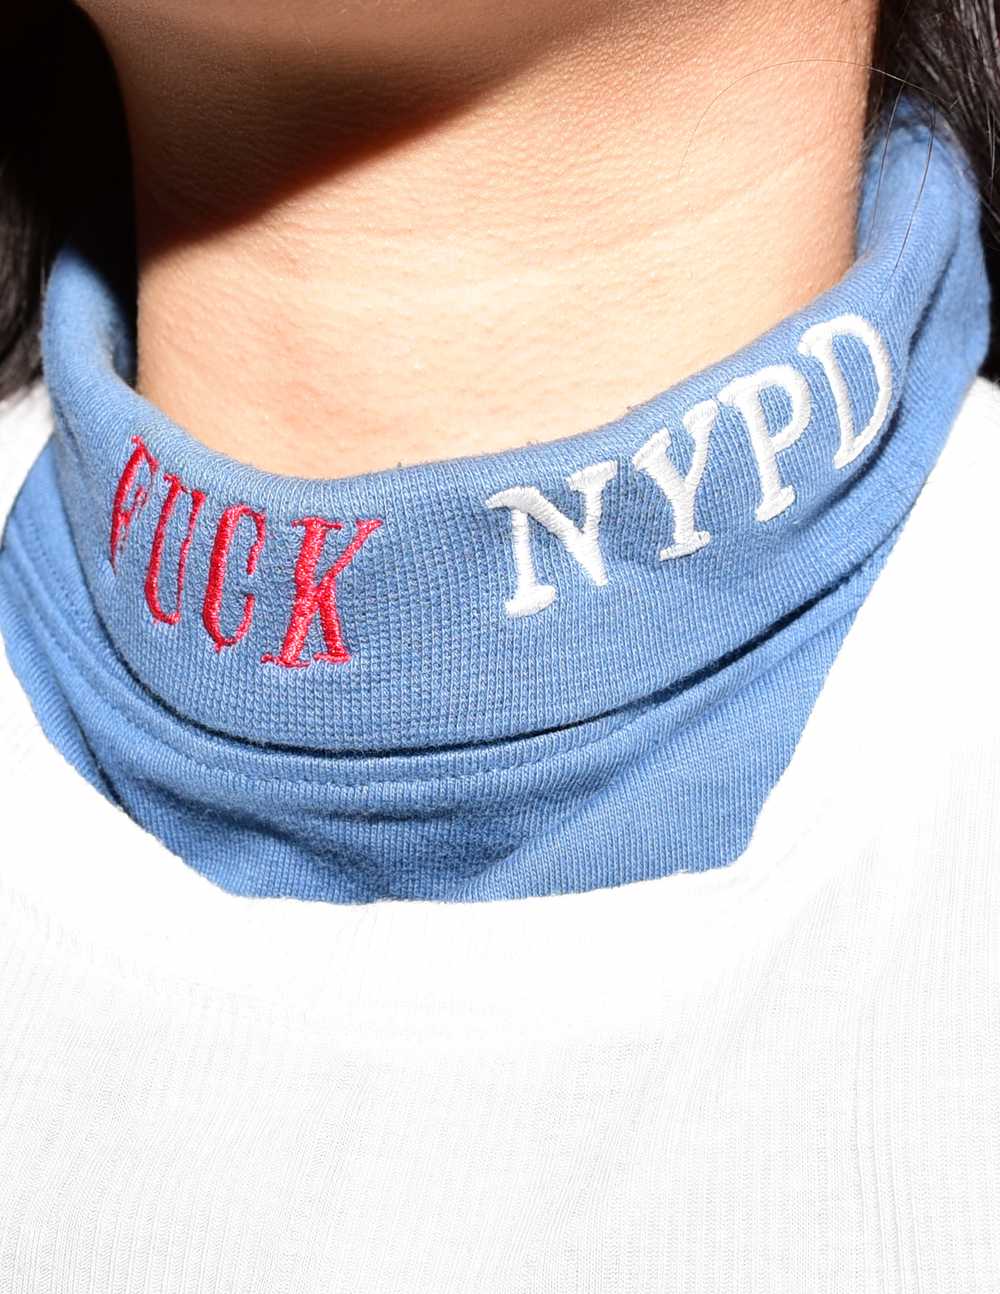 (B).Stroy Fuck NYPD Neck Gaiter - image 1